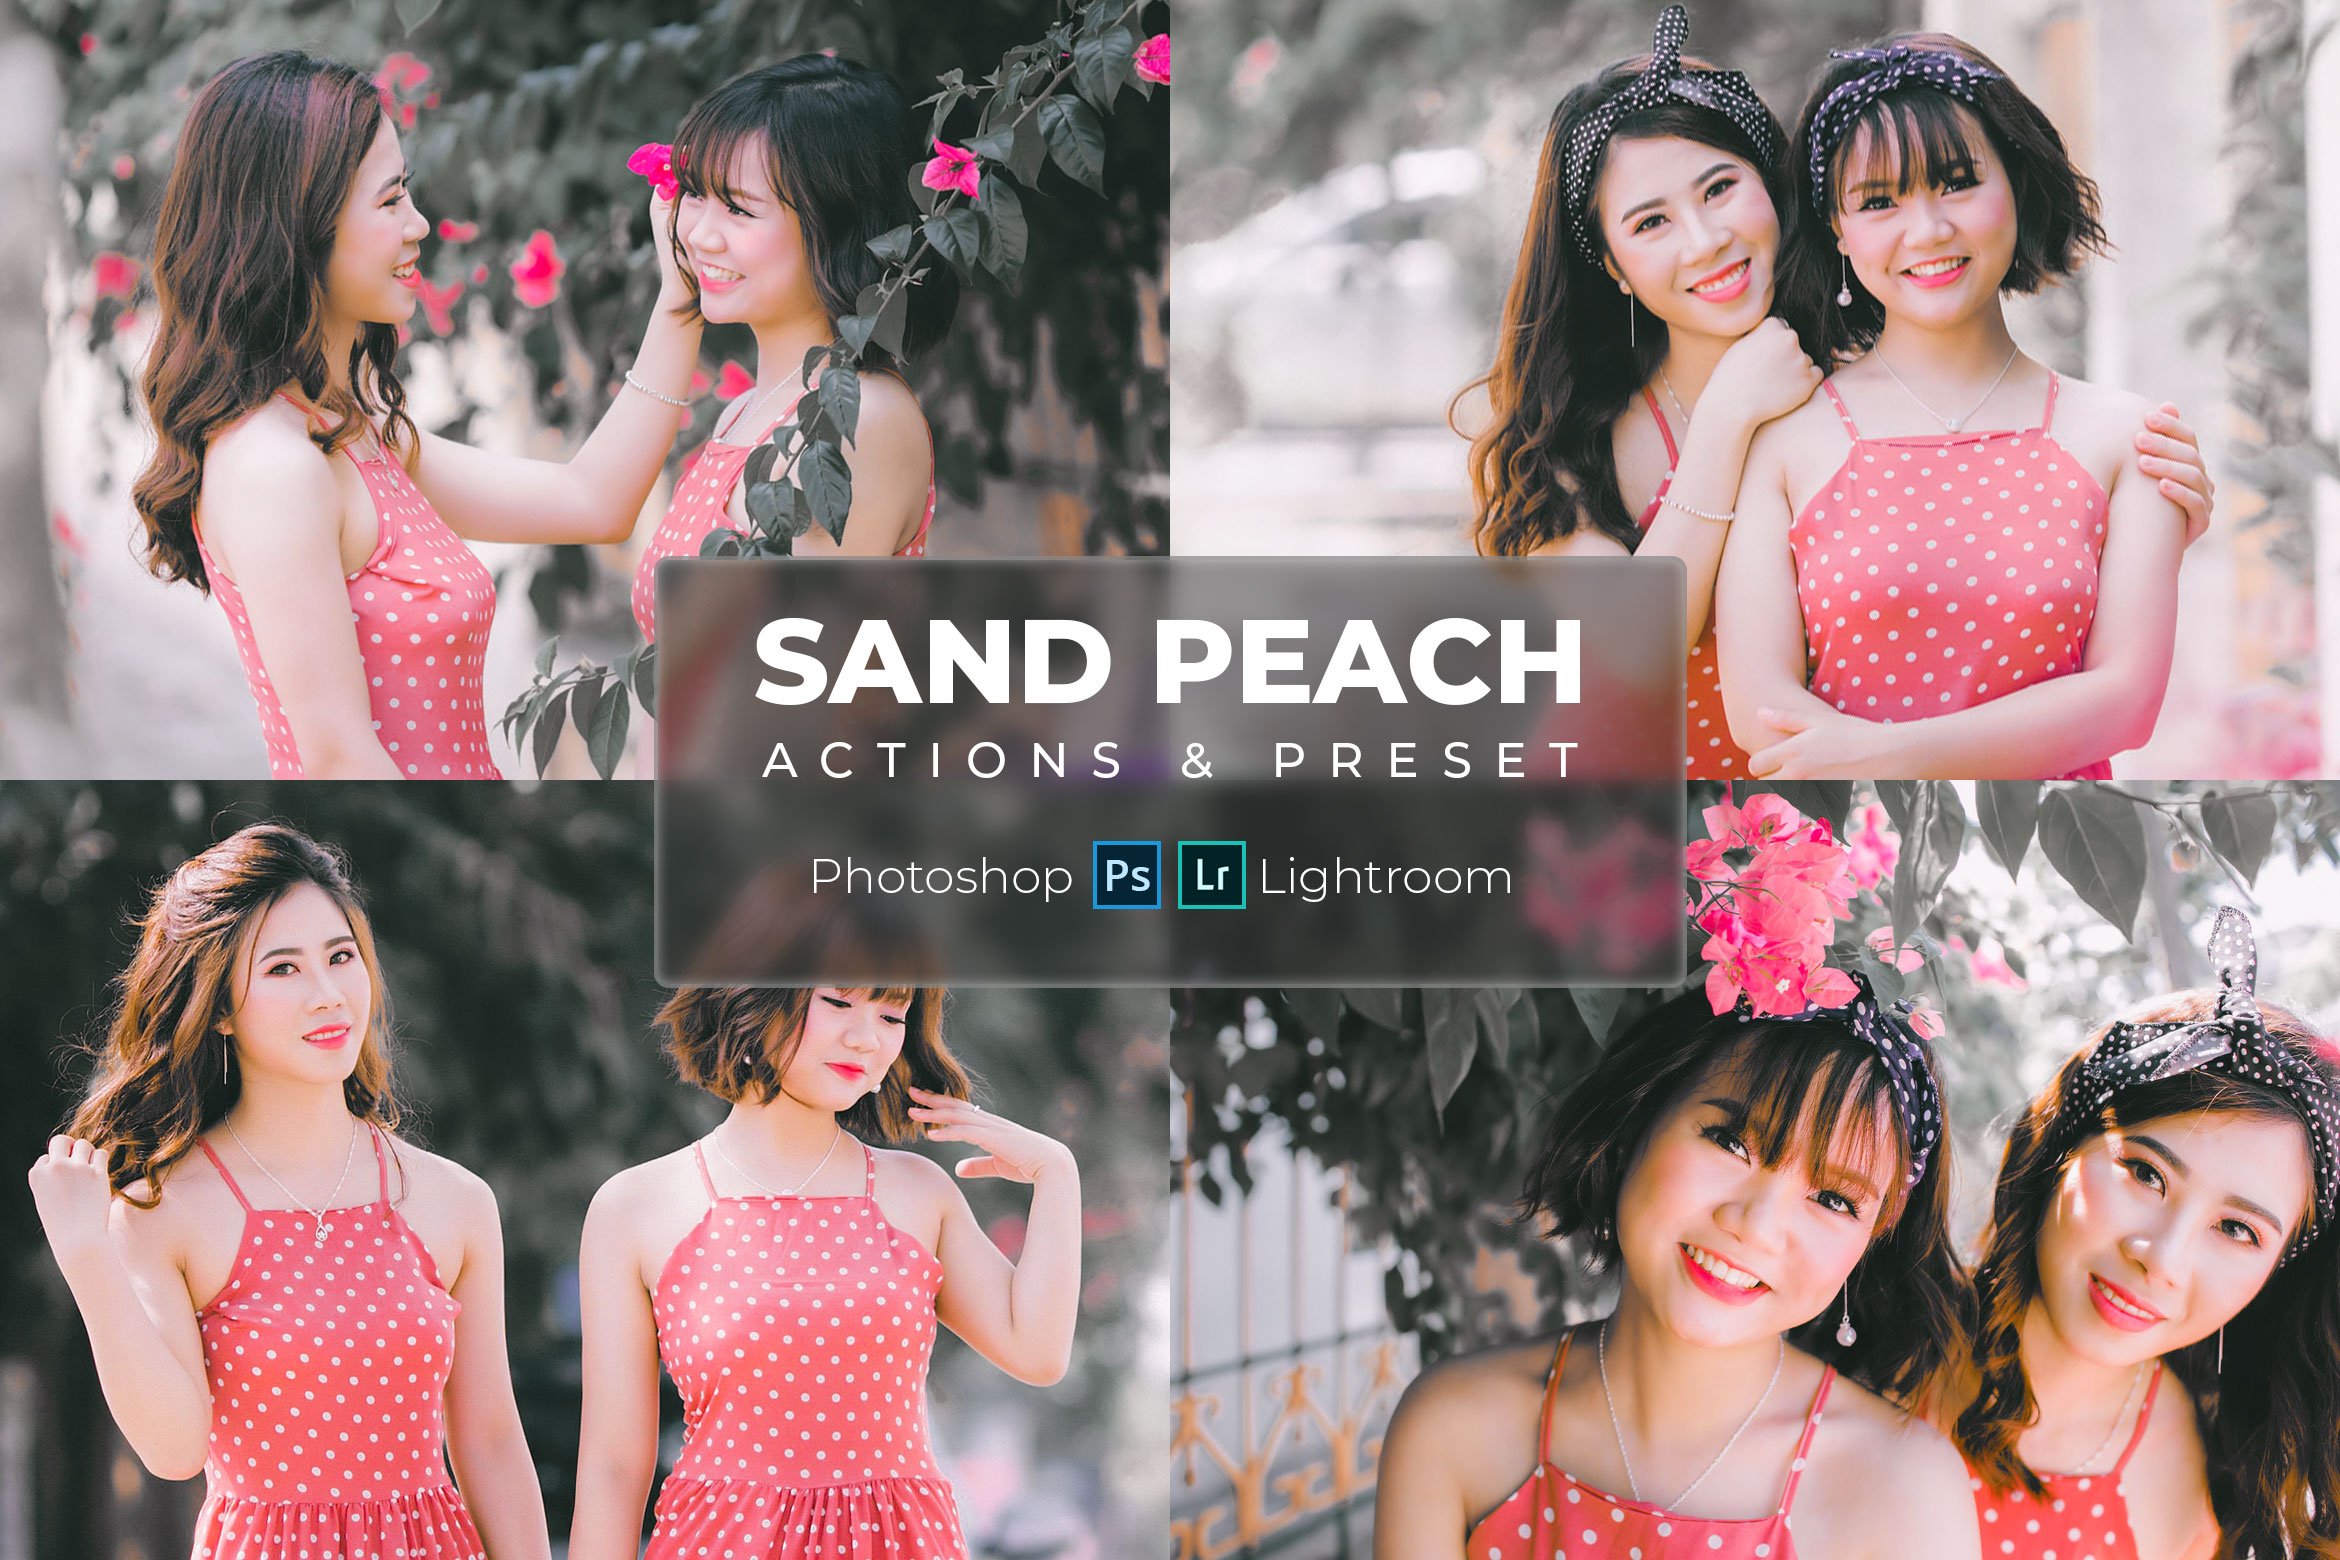 Actions & Presets - Sand Peach Stylecover image.